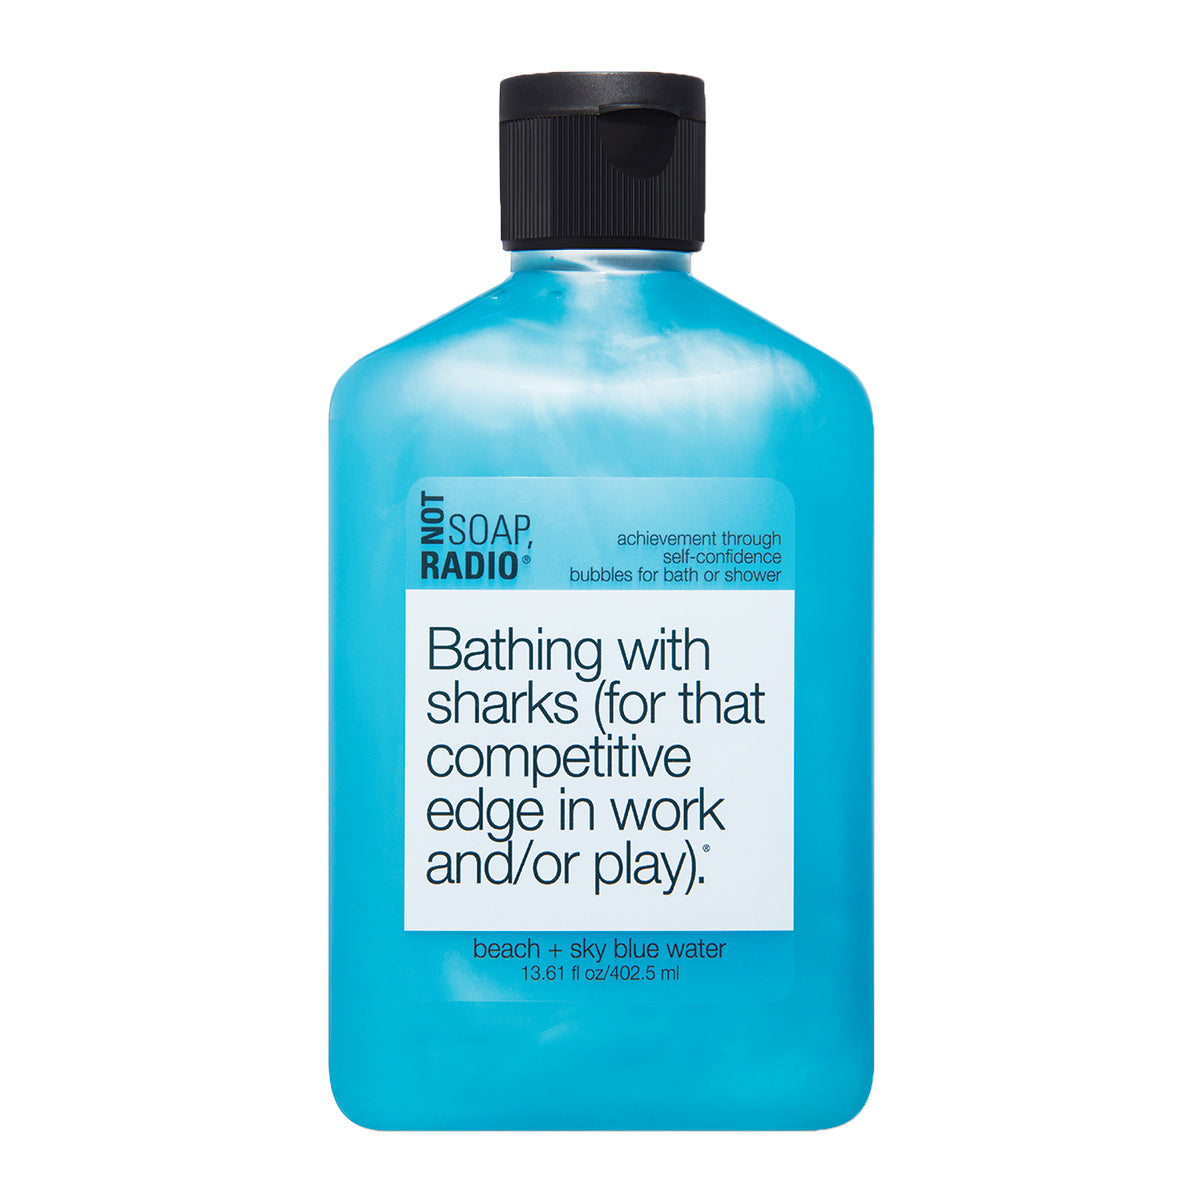 A confidence boosting beach and sky blue water scented bubble bath gel on a white background.